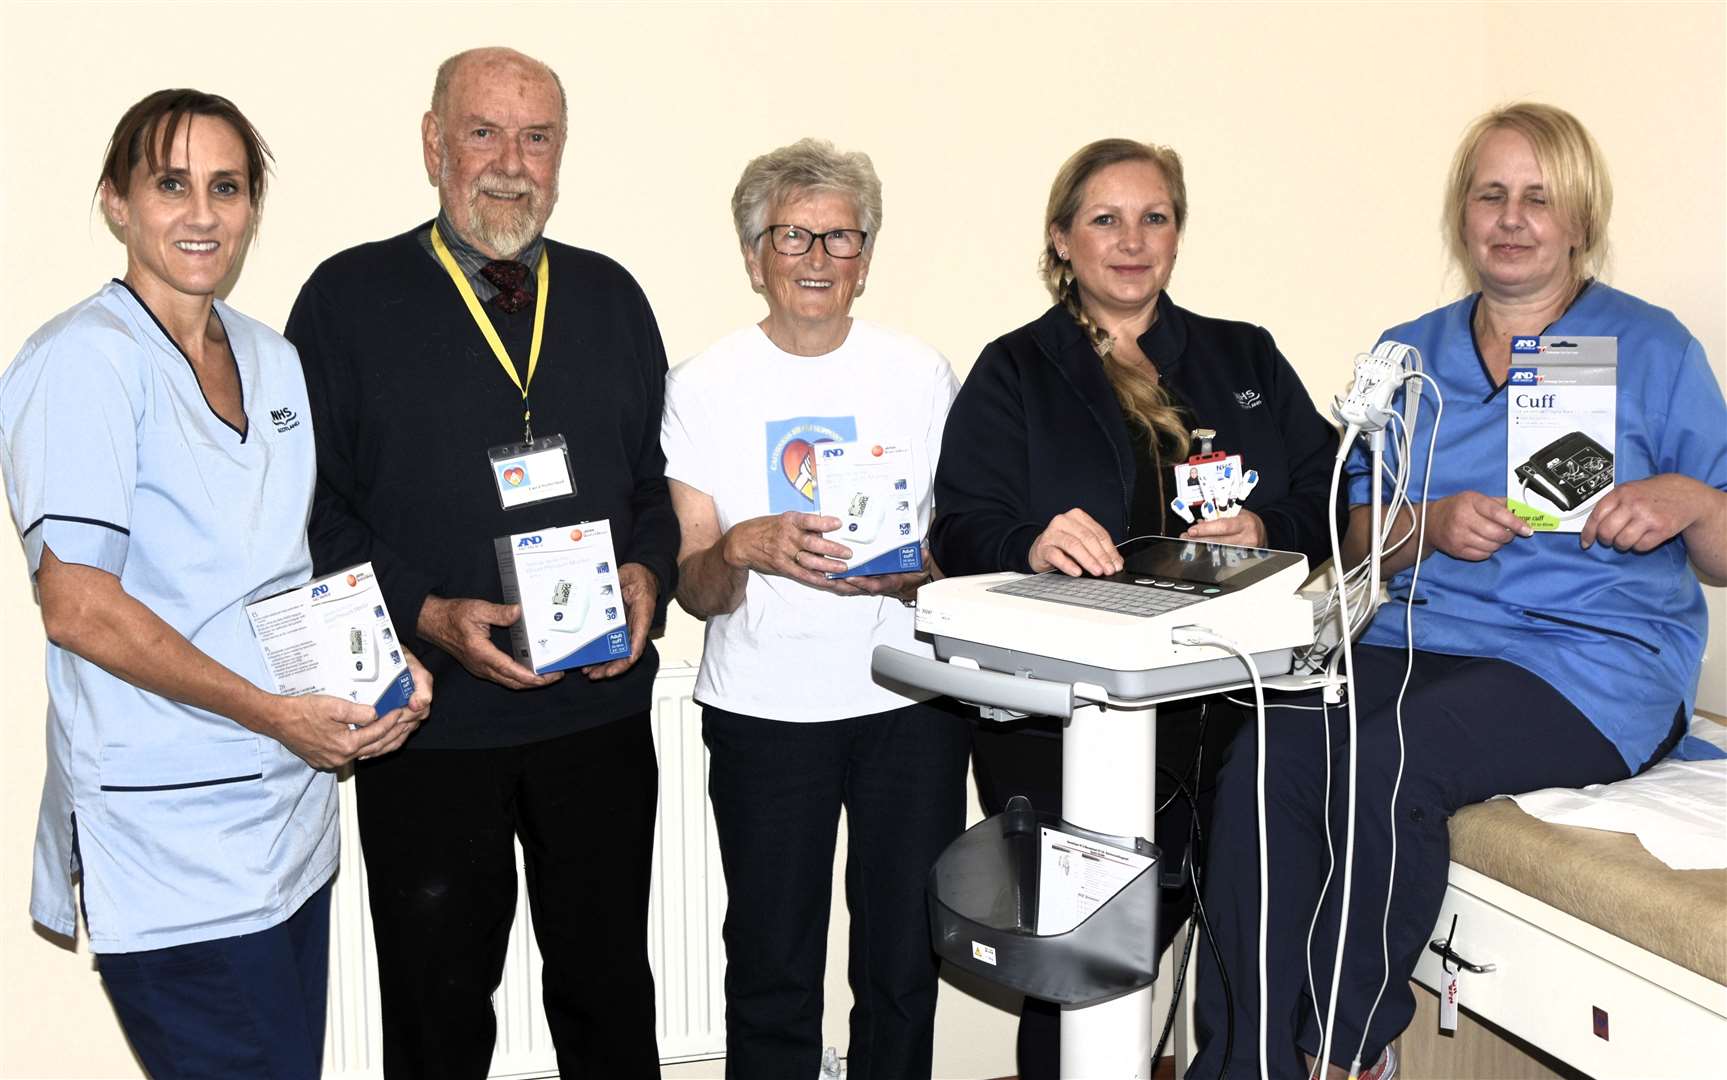 The presentation of the new ECG machine and other donations at Wick’s Three Harbours GP Practice.